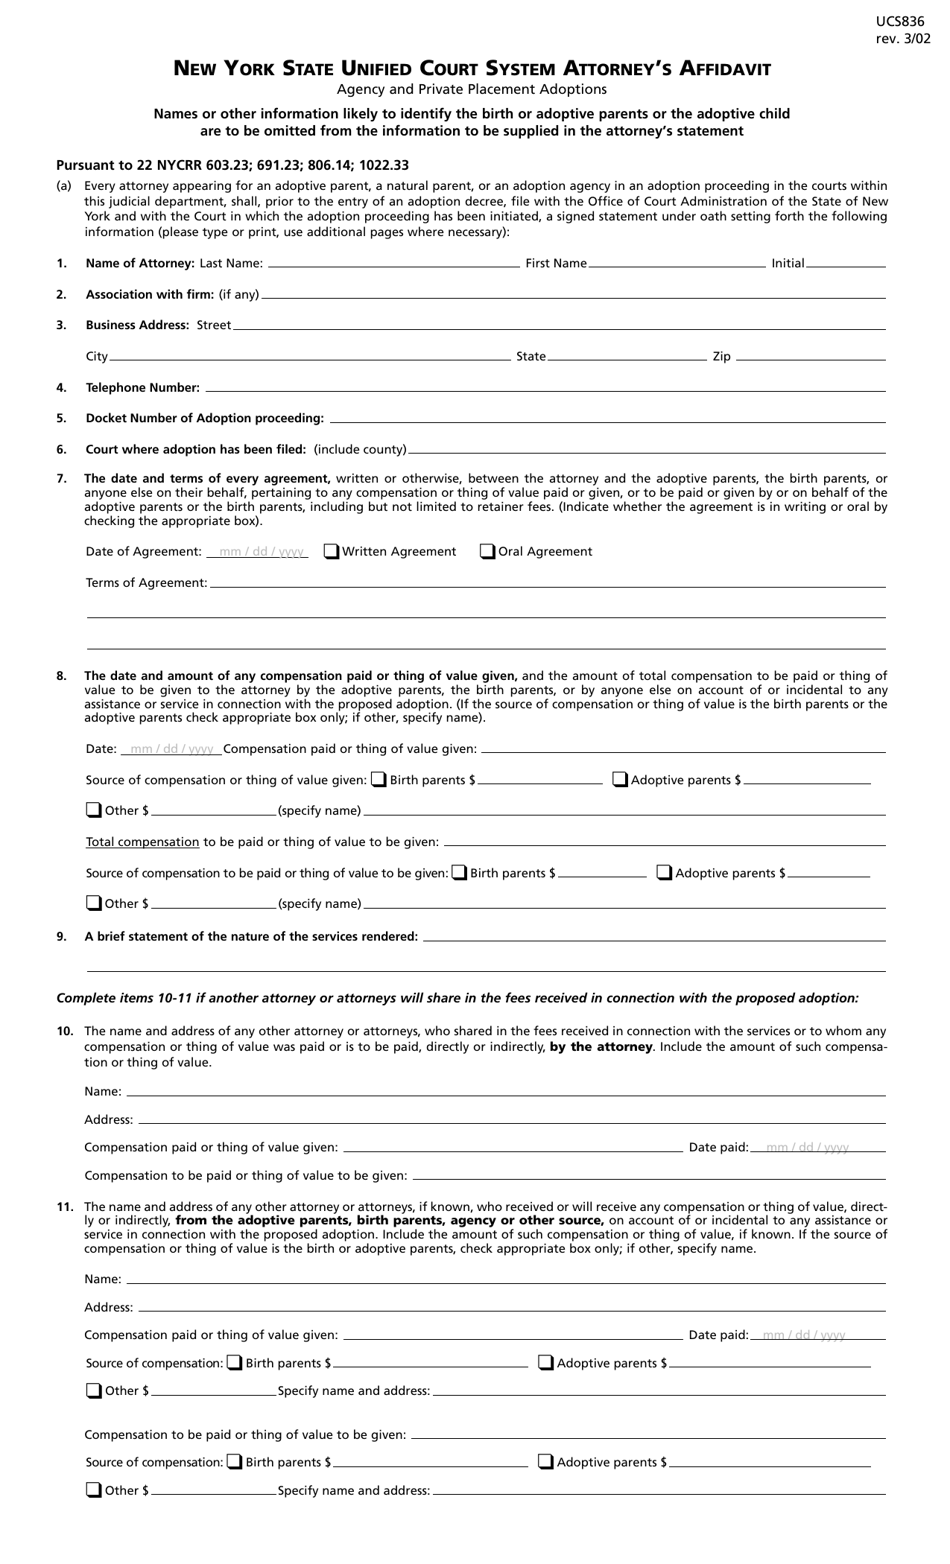 Form UCS-836 New York State Unified Court System Attorneys Affidavit - New York, Page 1